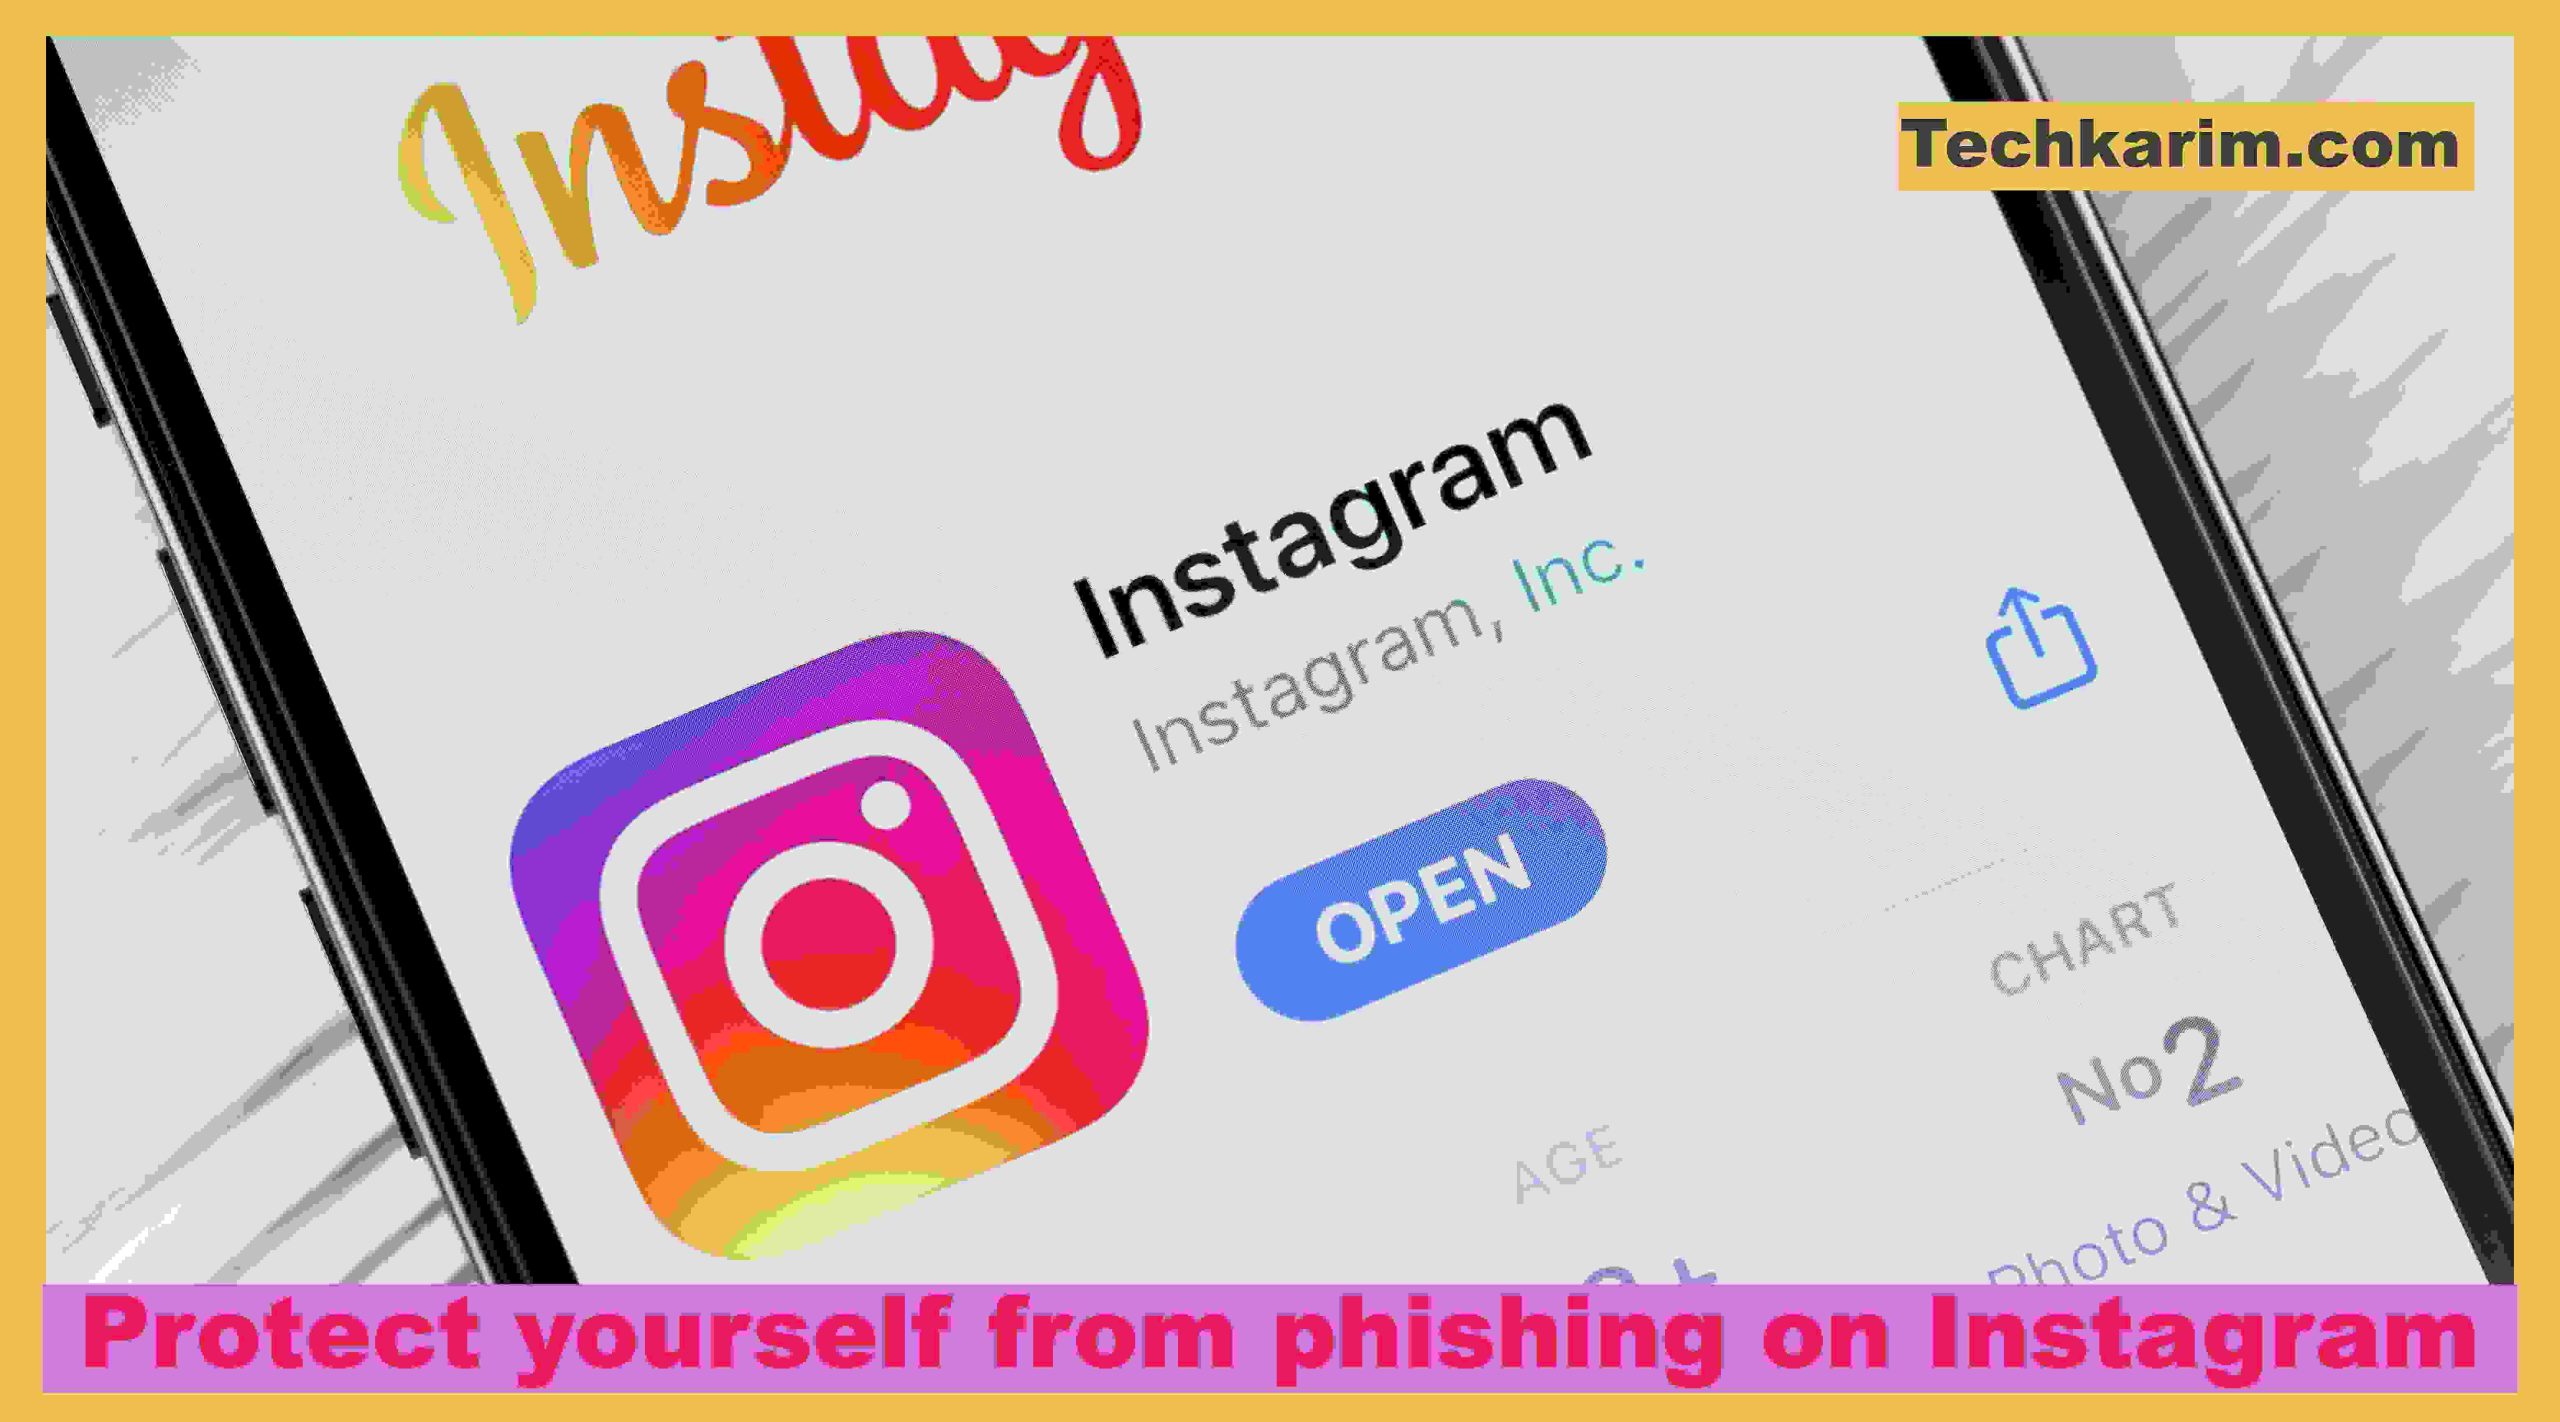 Protect yourself from phishing on Instagram